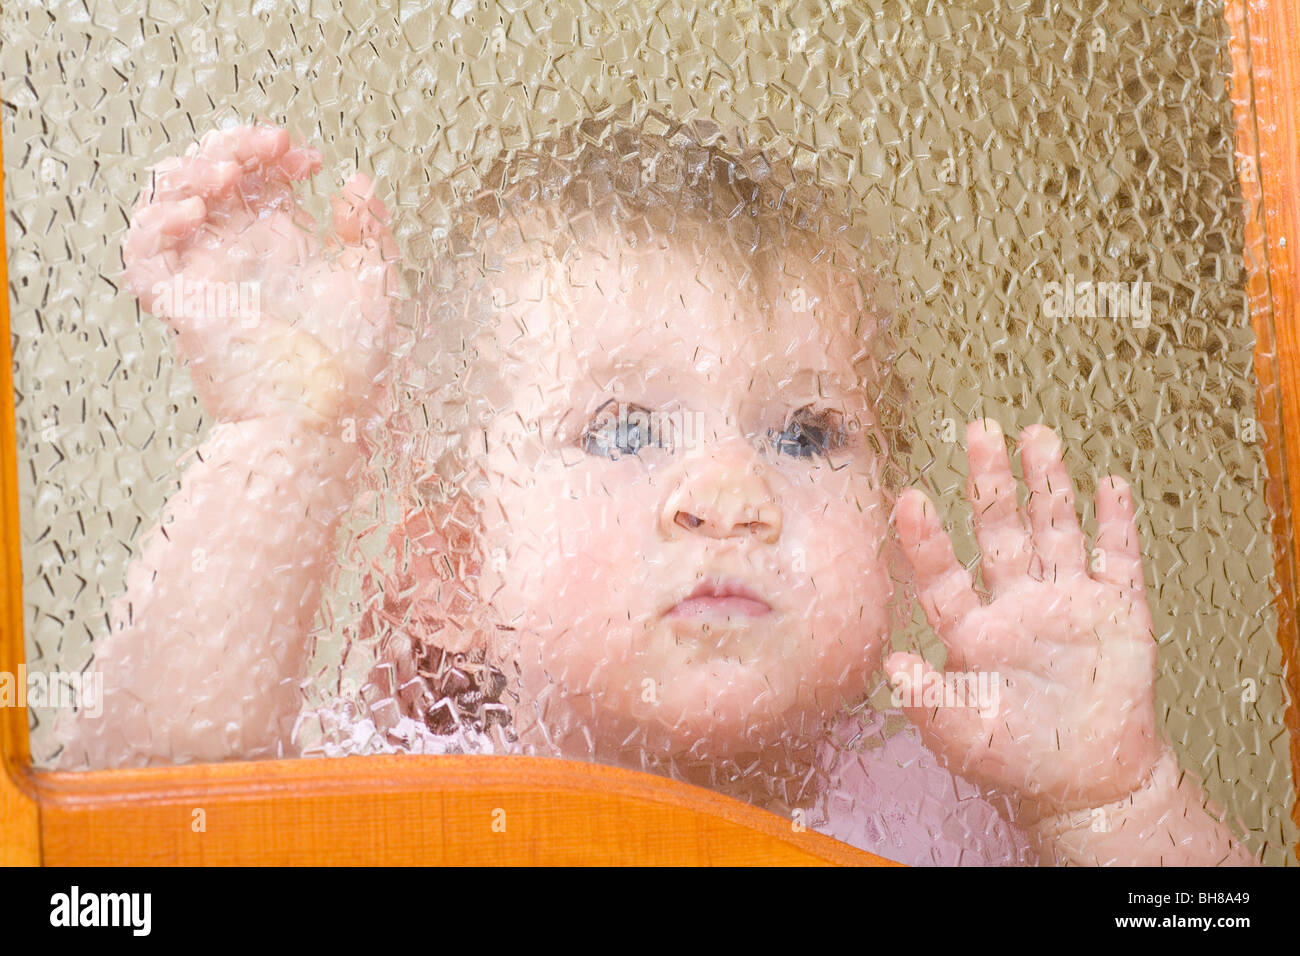 A child pressed up against a beveled glass window Stock Photo